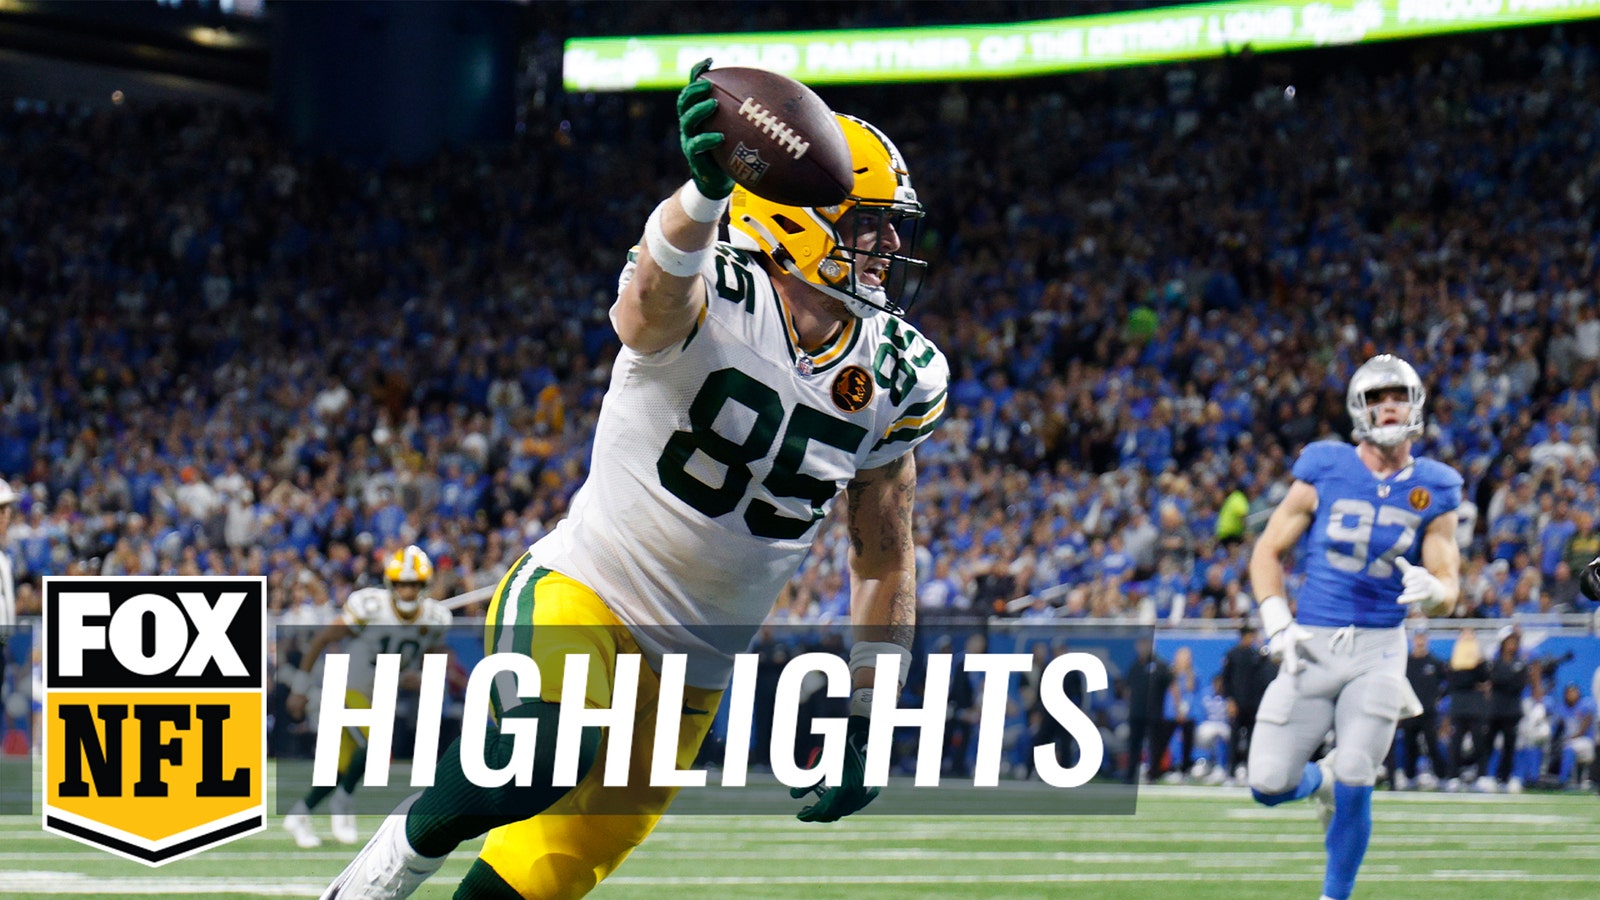 Packers' Jonathan Owens recovers fumble and returns it for TD vs. Lions 